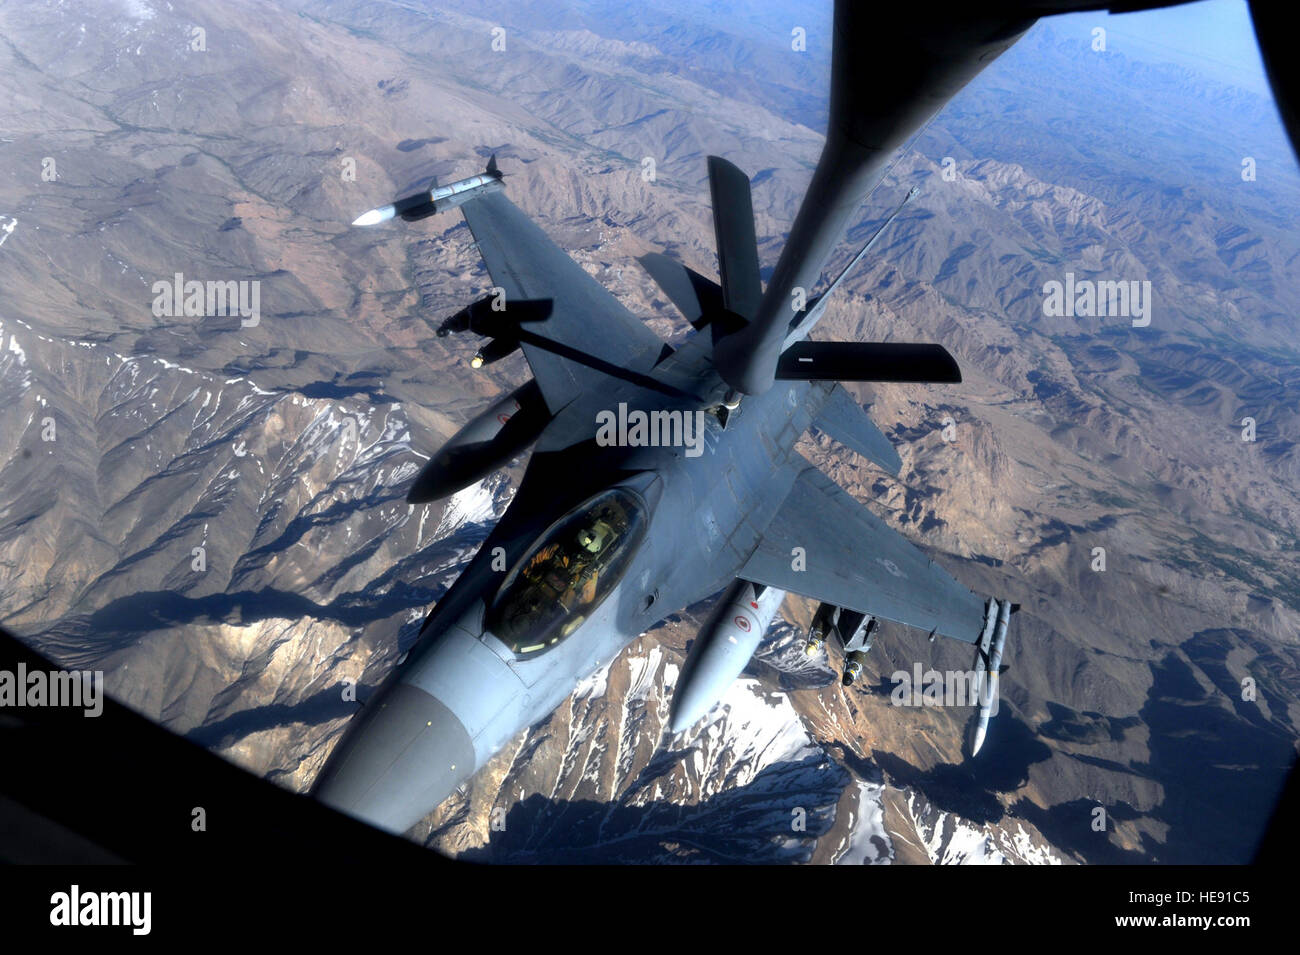 A F-16 Fighting Falcon, from the 555th Expeditionary Fighter Squadron, maneuvers into position to be refueled by a KC-135 Stratotanker, from the 340th Expeditionary Air Refueling Squadron, during an air refueling mission in the skies of Afghanistan supporting Operation Enduring Freedom, May 12, 2011.  Master Sgt. William Greer) Stock Photo